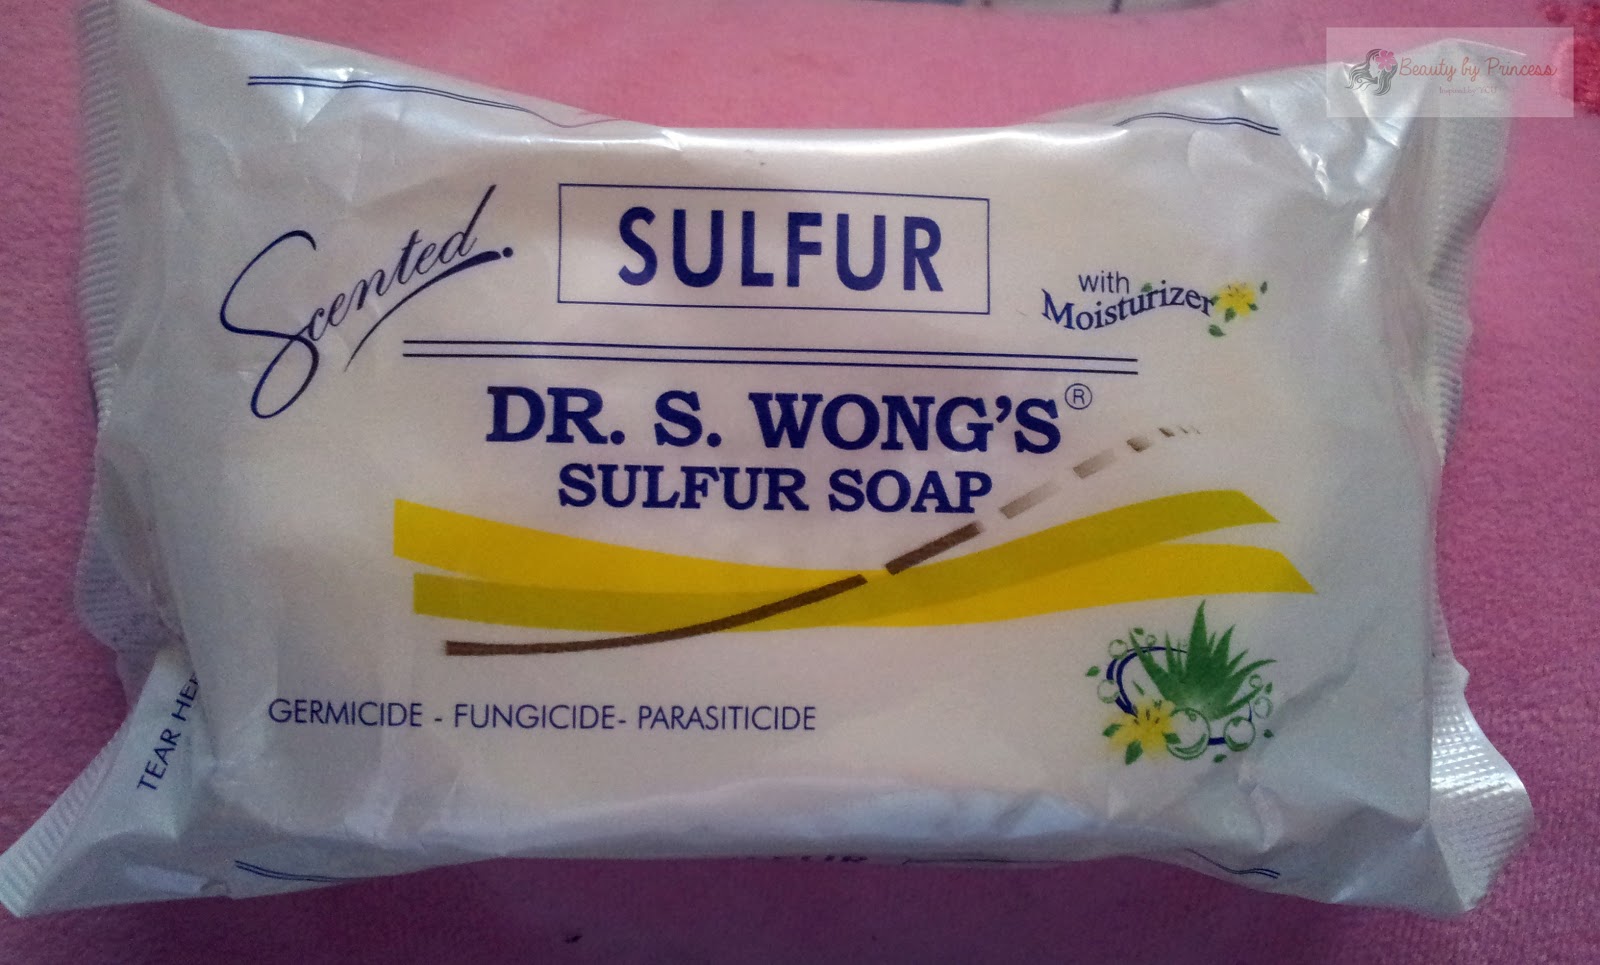 Dr. S.Wong's Sulfur Soap with moisturizer - Miss Princess Diaries